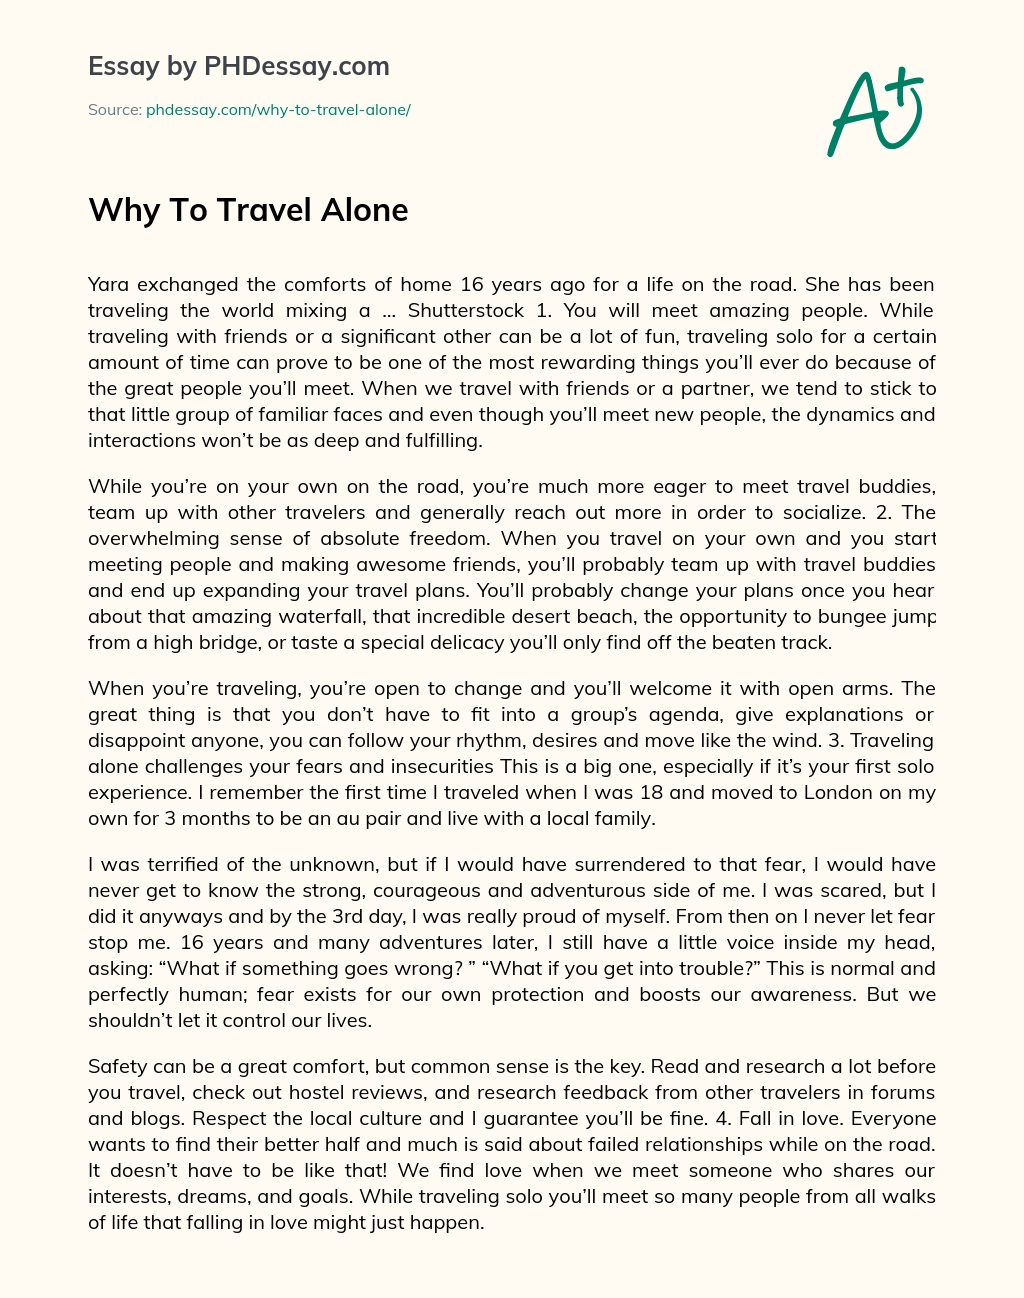 Why To Travel Alone essay